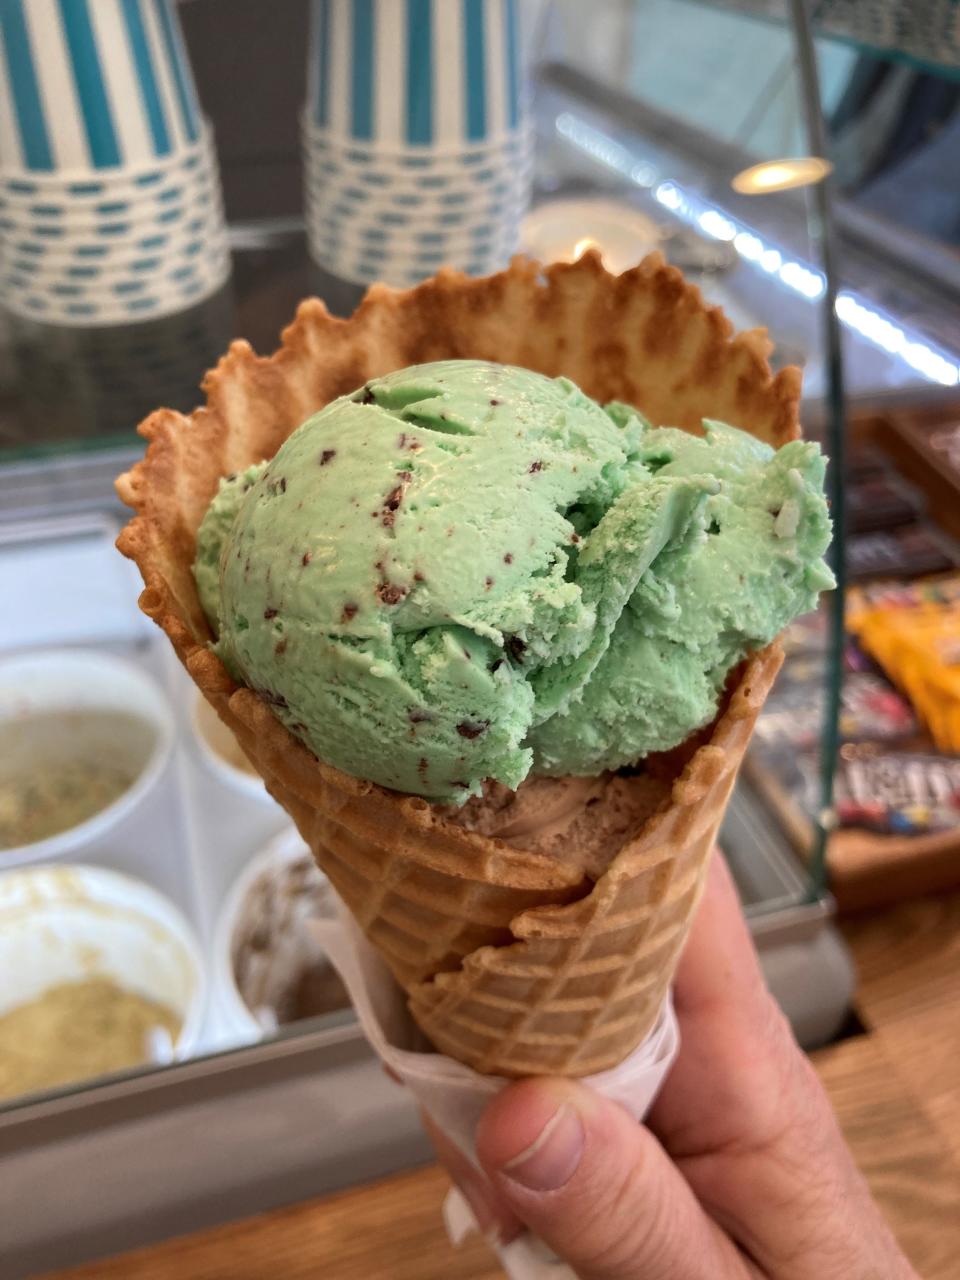 Ice cream from Gillette Creamery is on the menu at Temptations in Nyack which reopened in March under new ownership. Photographed March 16, 2022.